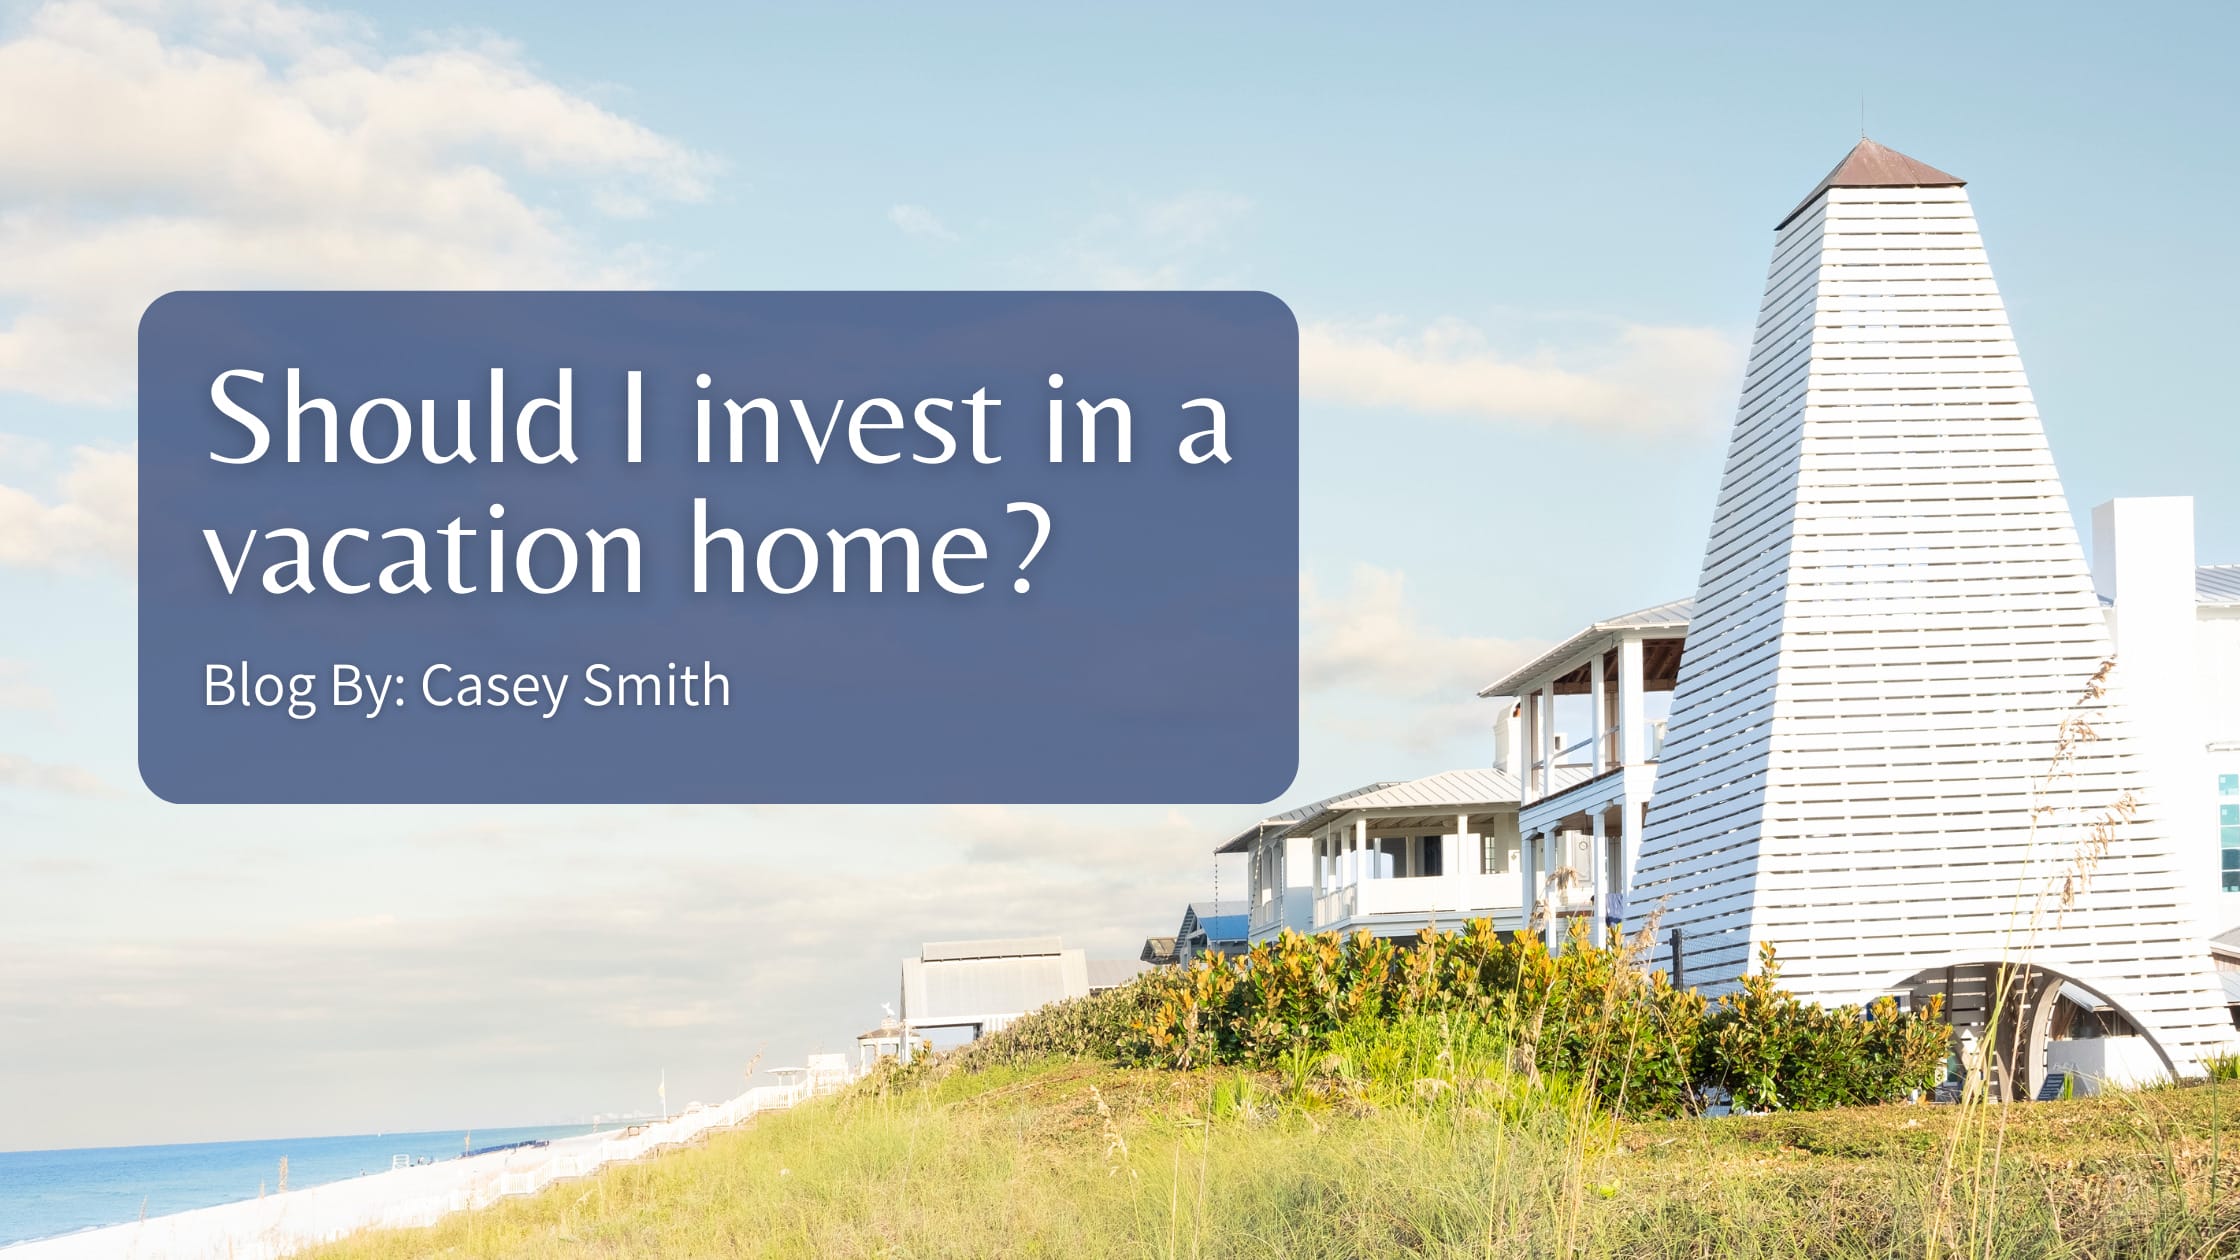 Should I invest in a vacation home?